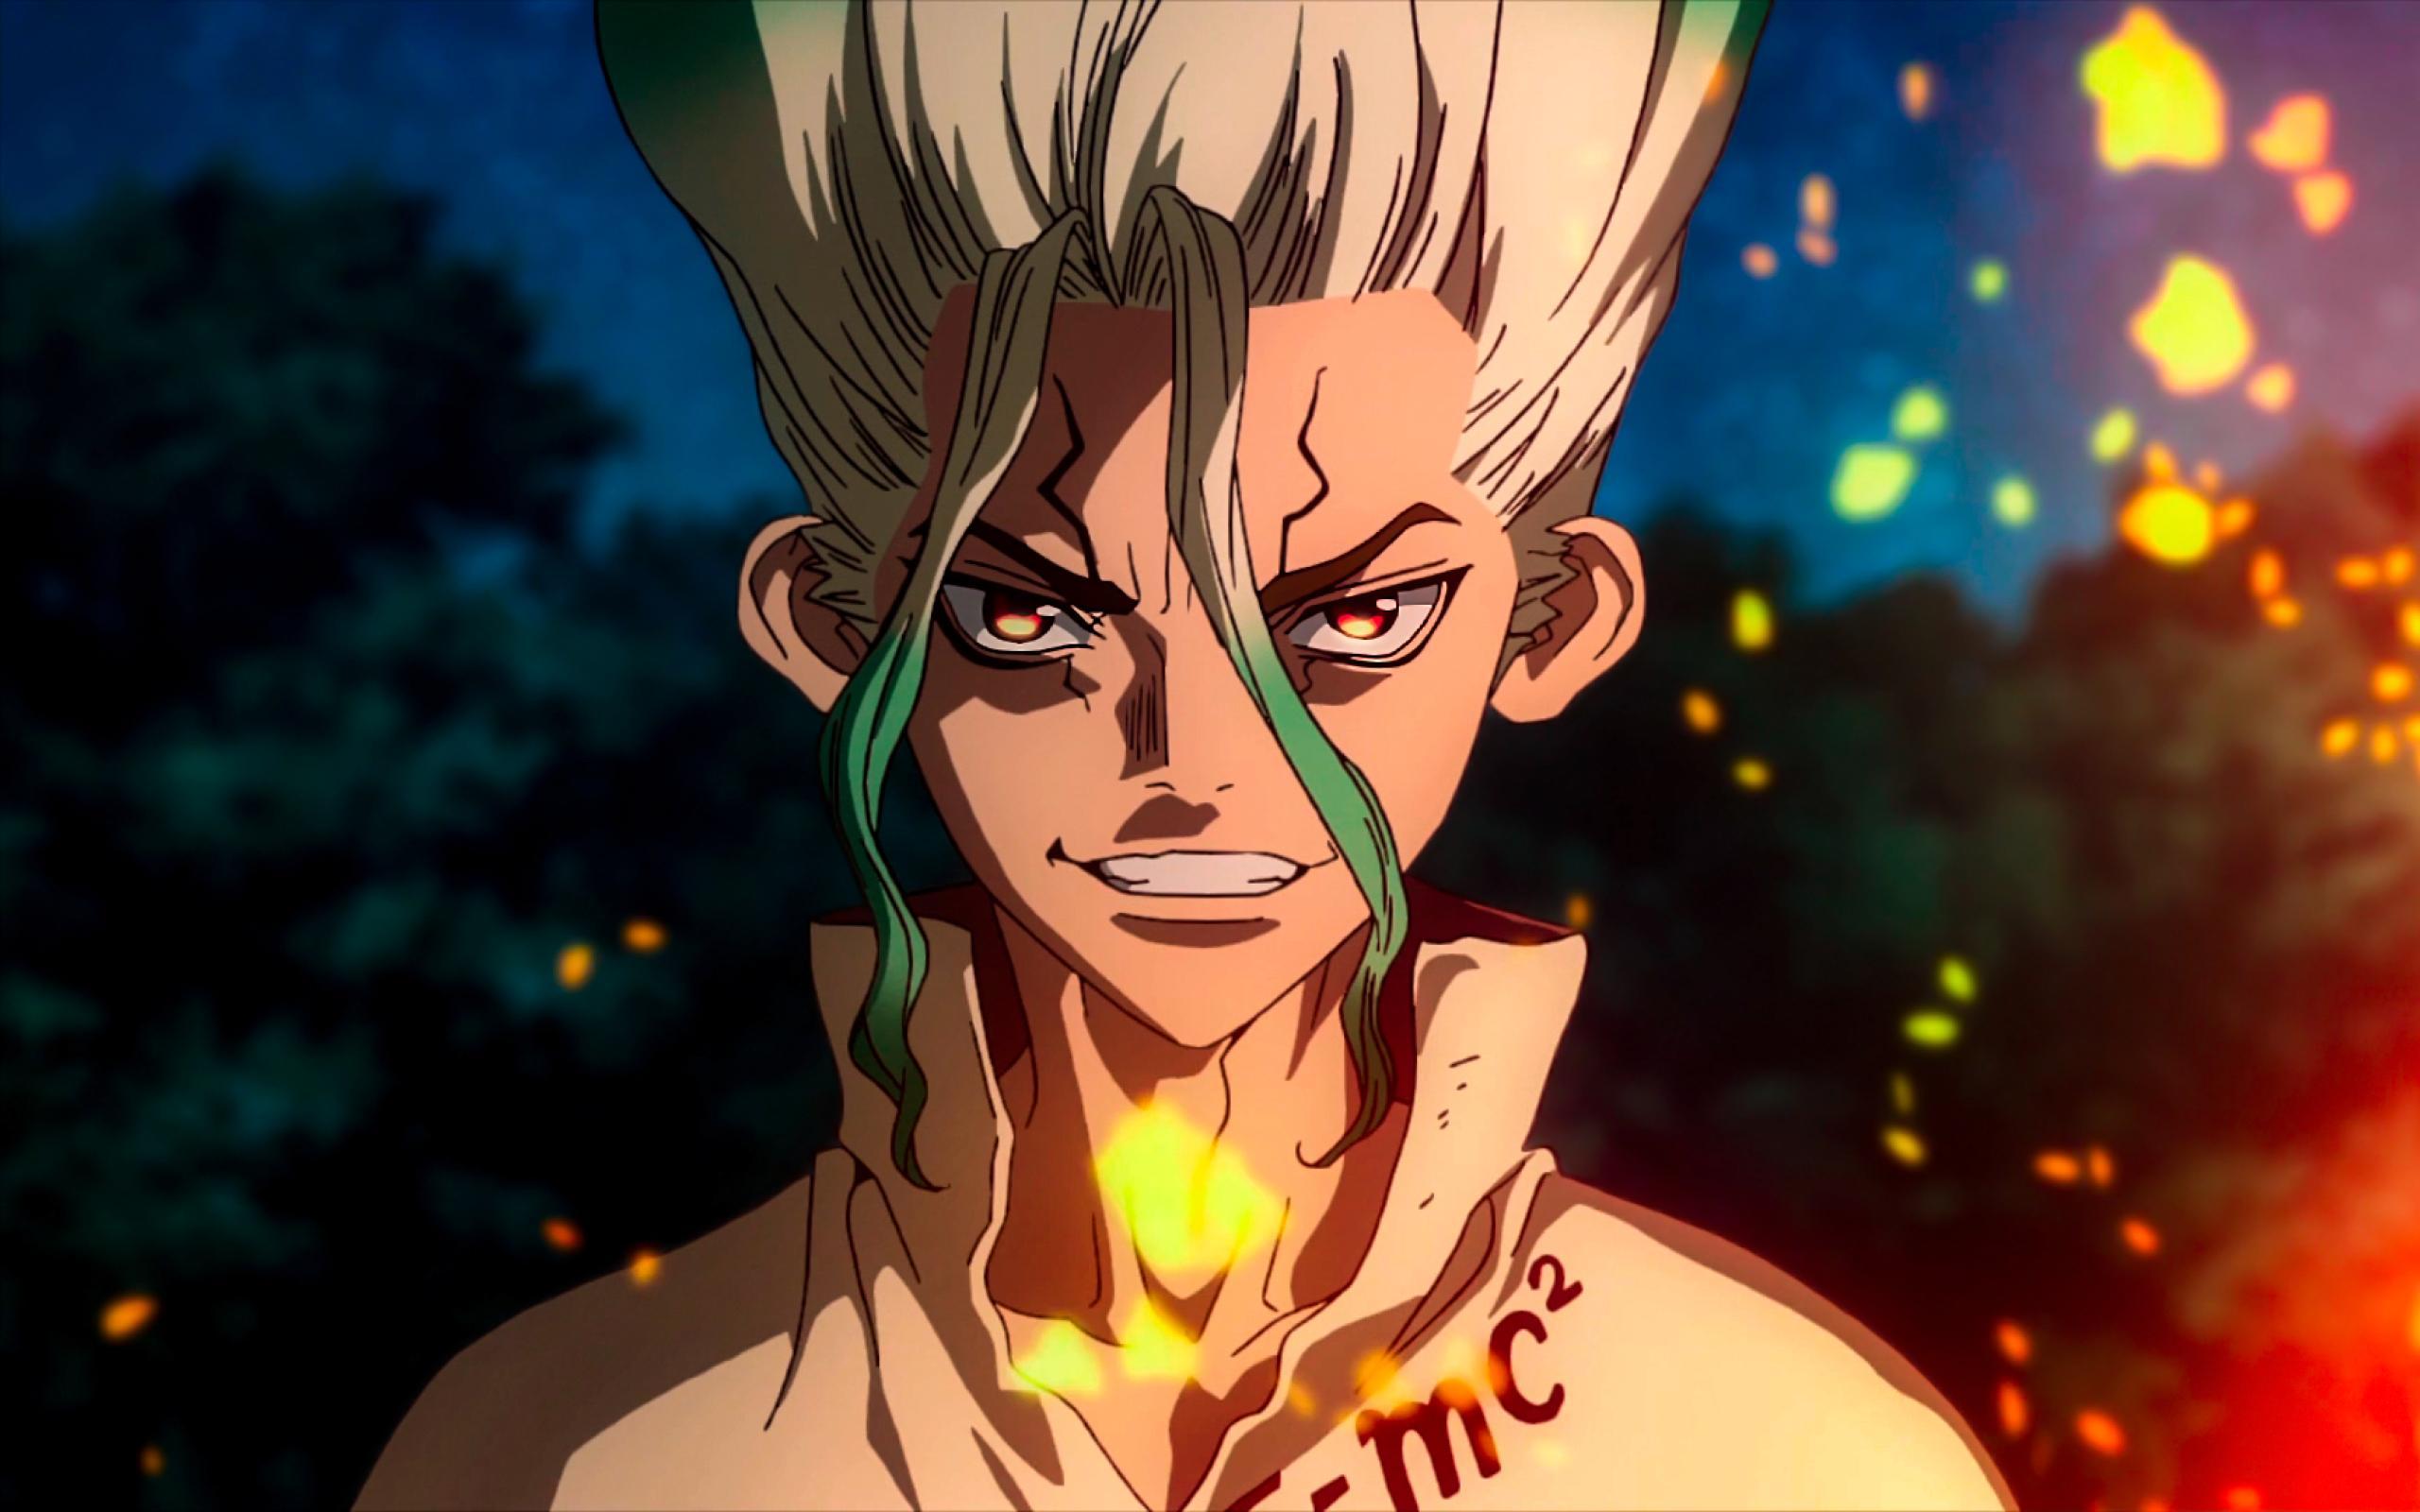 Dr Stone Anime Hd Wallpapers Wallpaper Cave